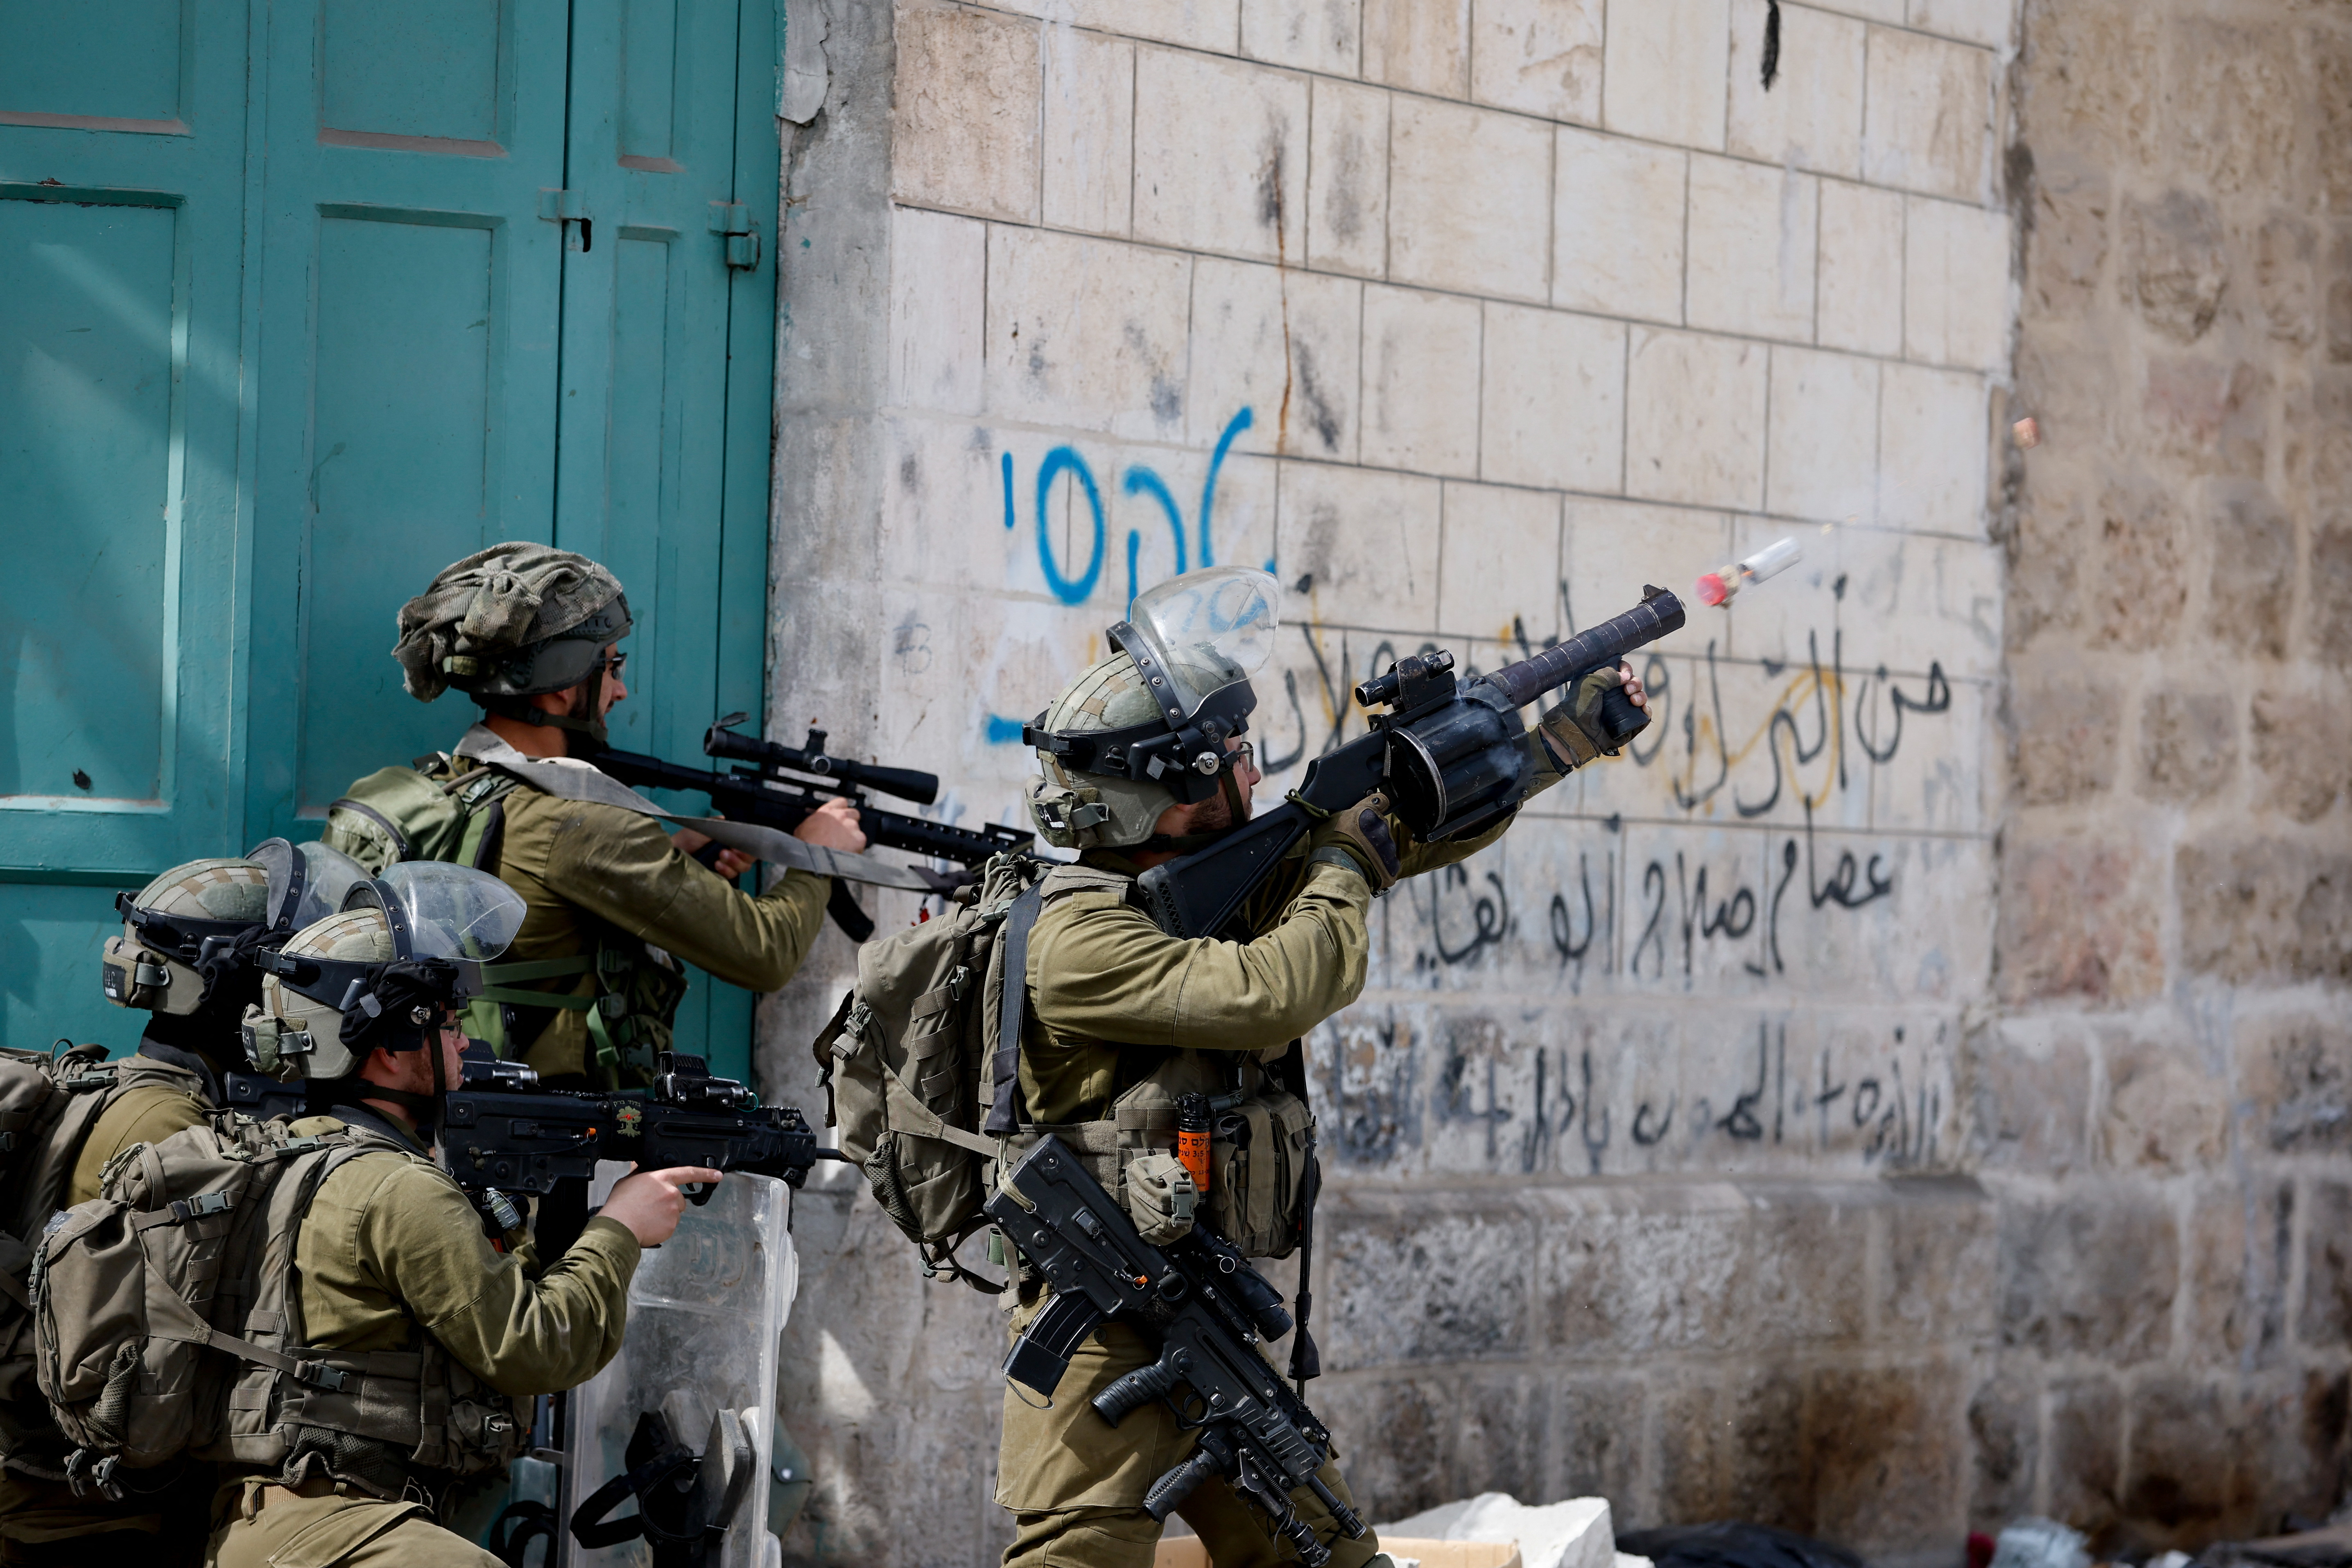 Israeli soldier uses a weapon amid clashes with Palestinian protesters, in Hebron